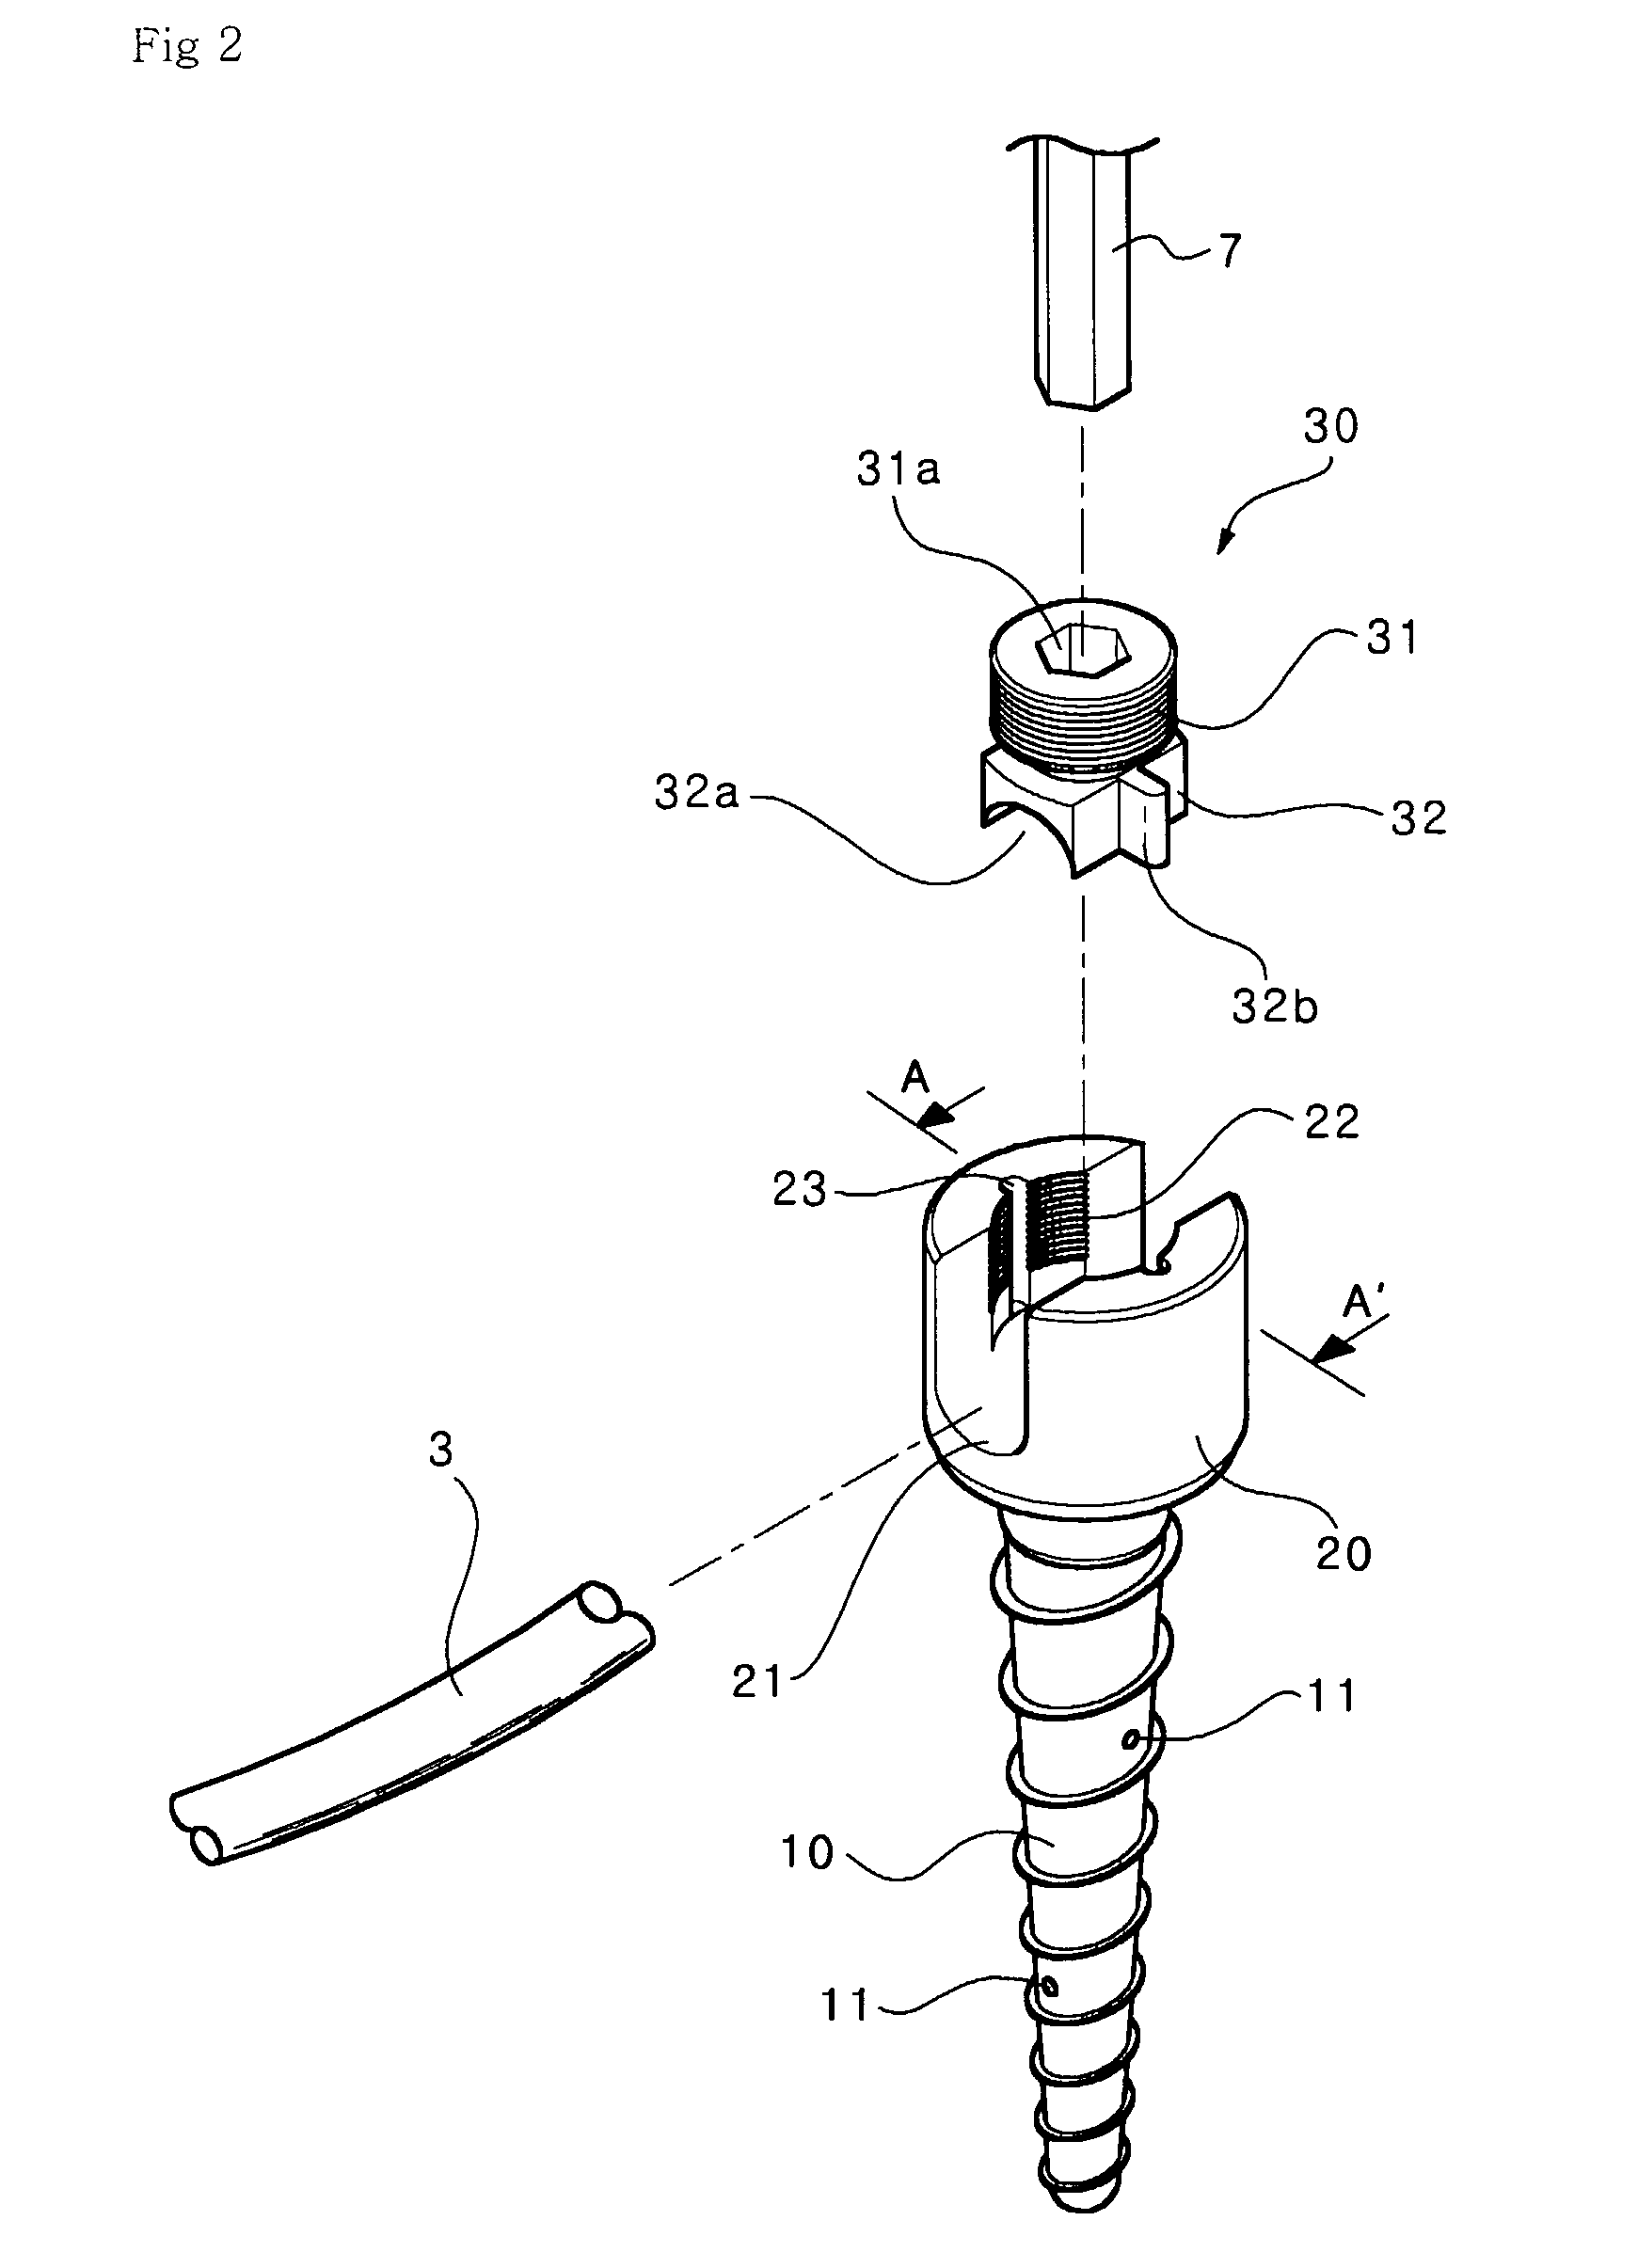 Pedicle Screw and Device for Injecting Bone Cement into Bone